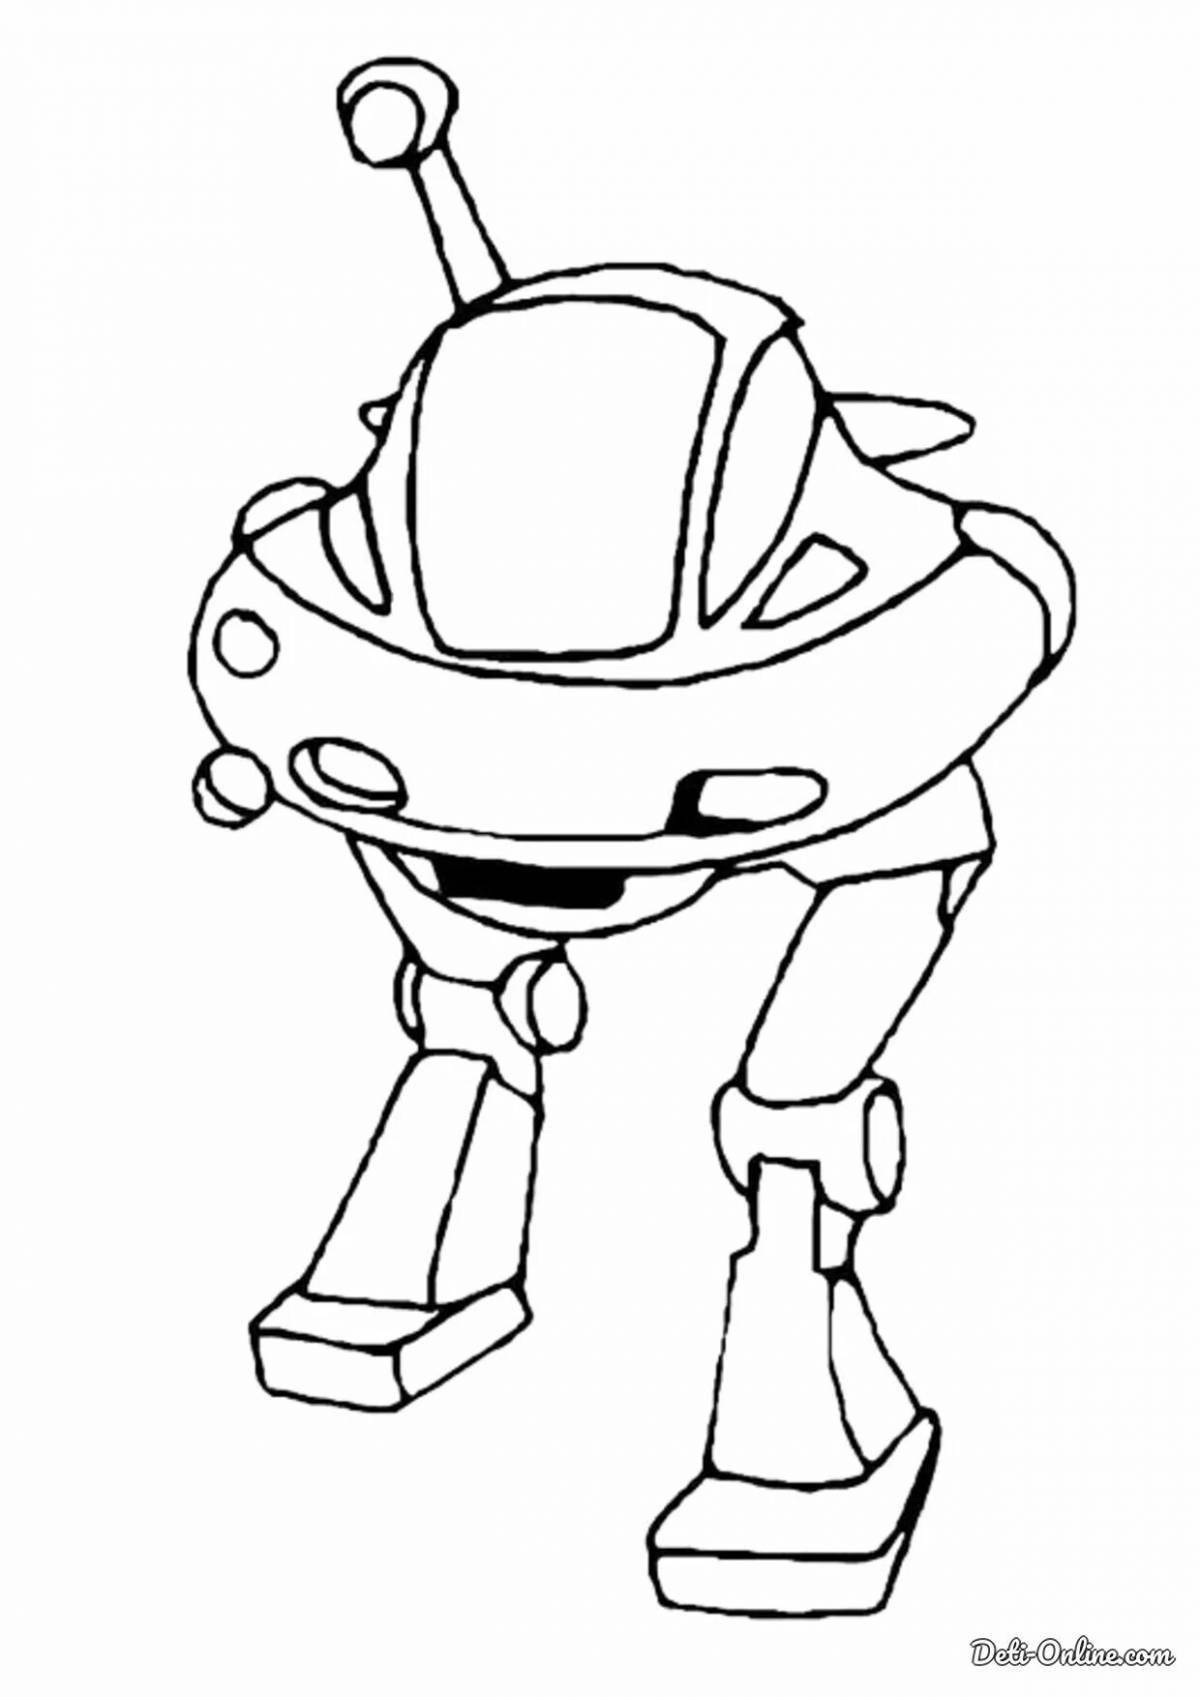 Amazing tobots coloring for kids